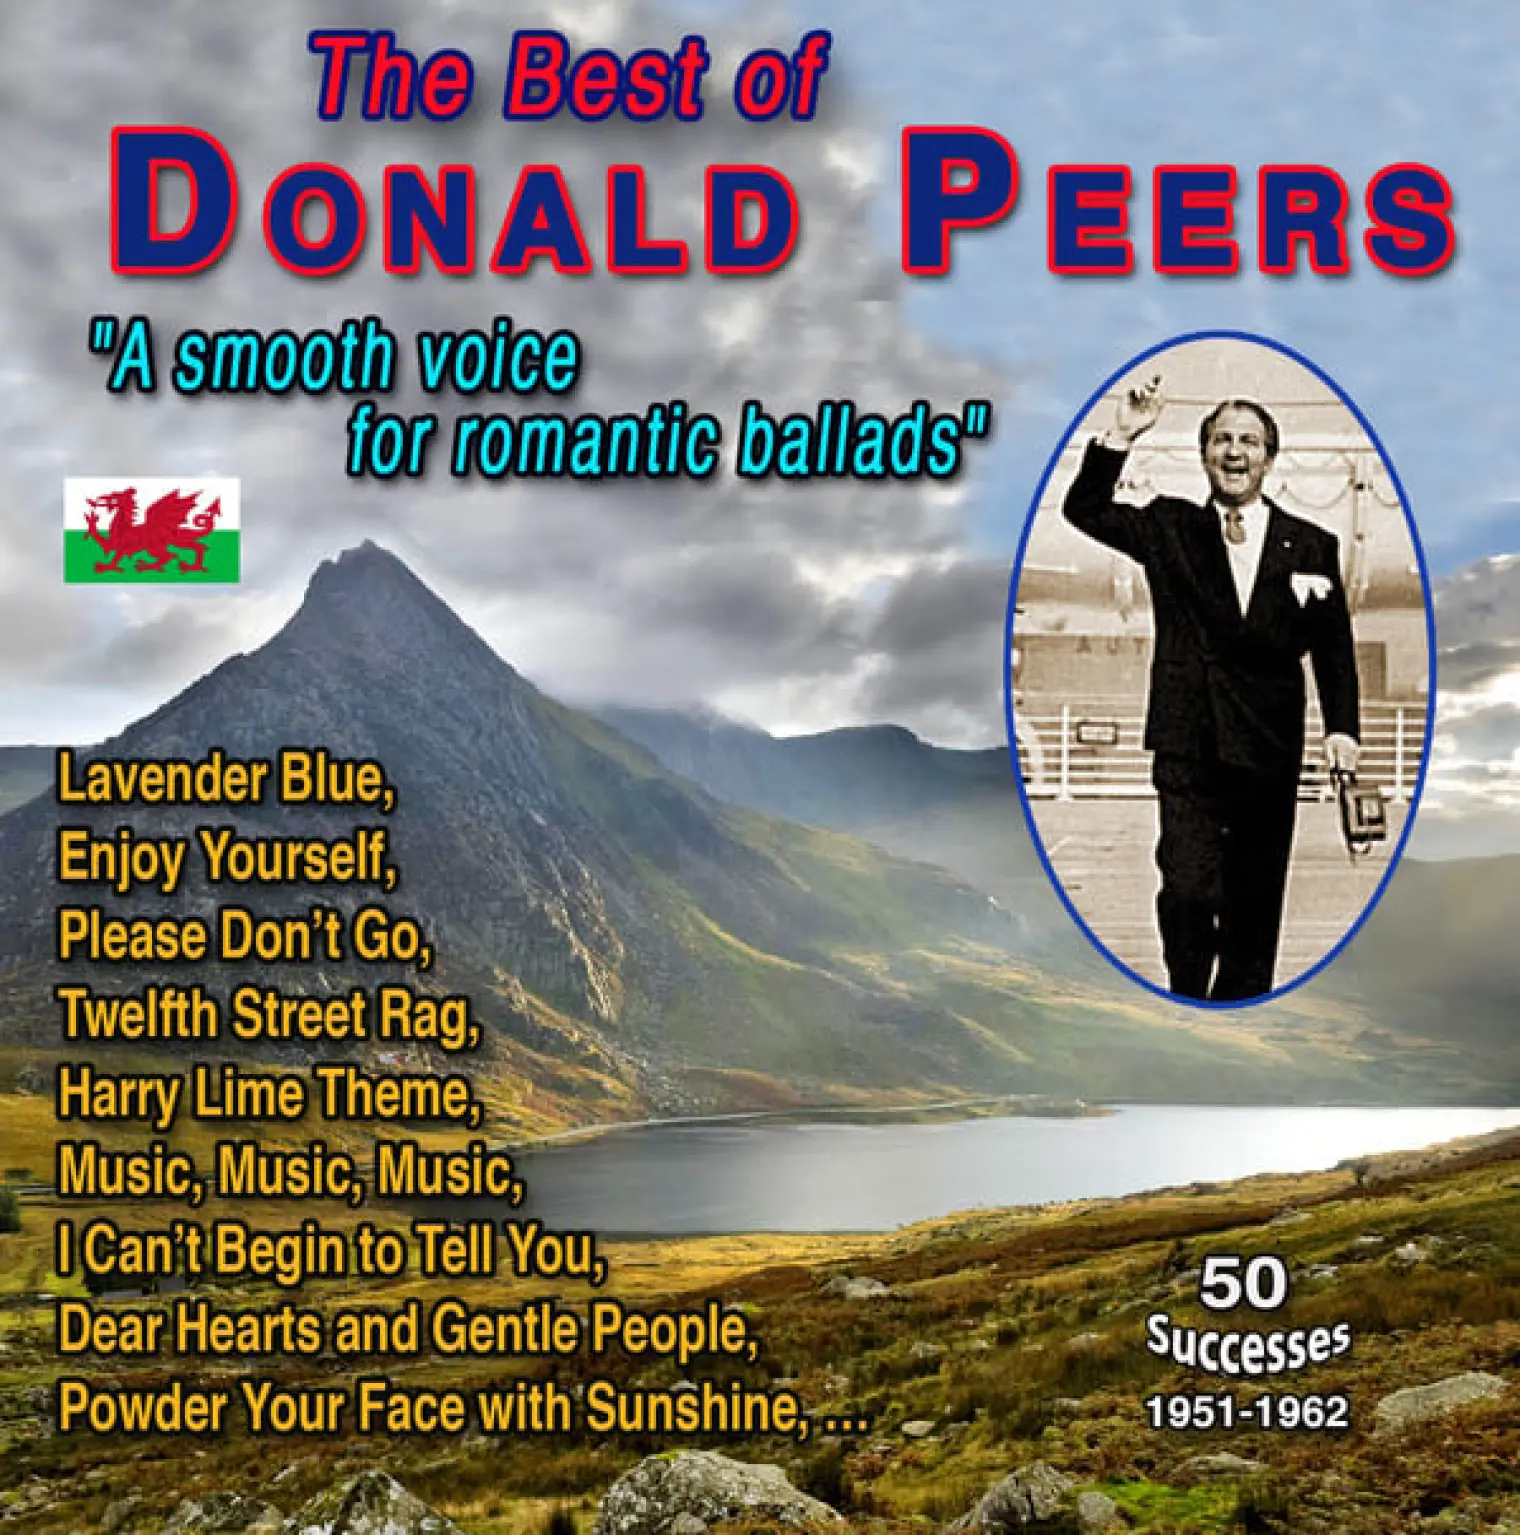 Donald Peers "A smooth voice for romantic ballads" (50 Successes 1951-1962) -  Donald peers 